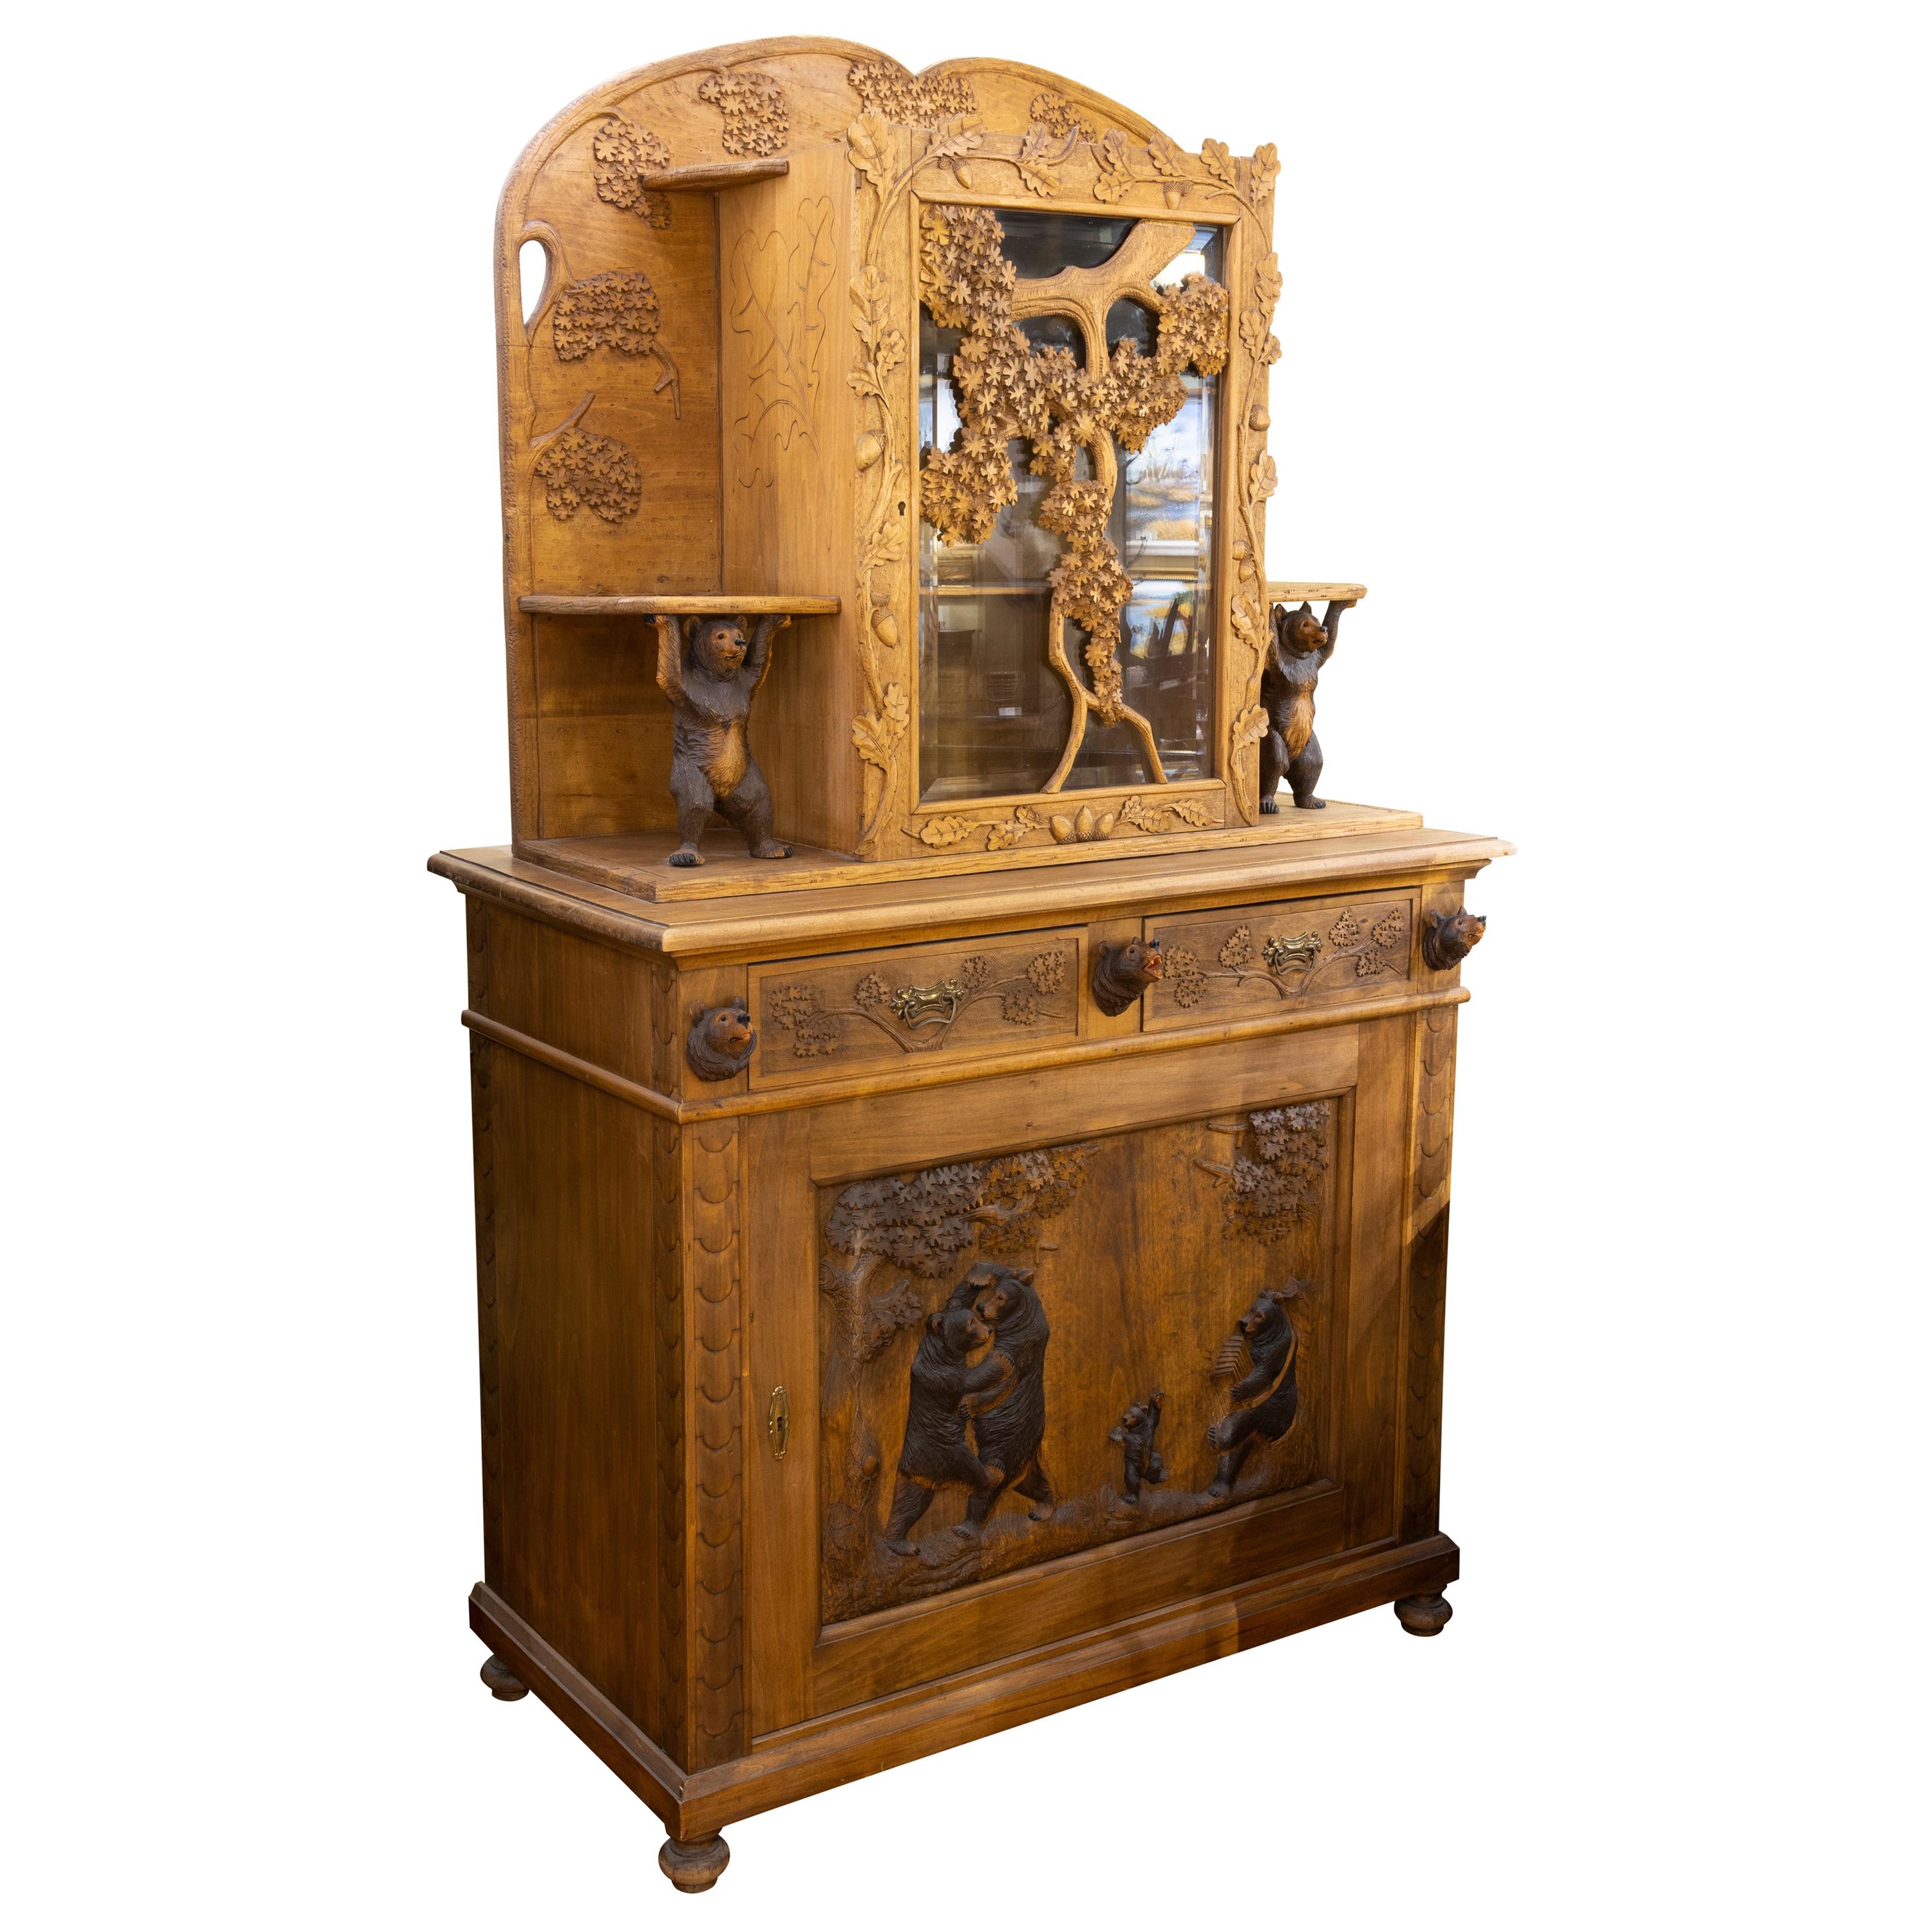 19th Century Black Forest Carved Cabinet